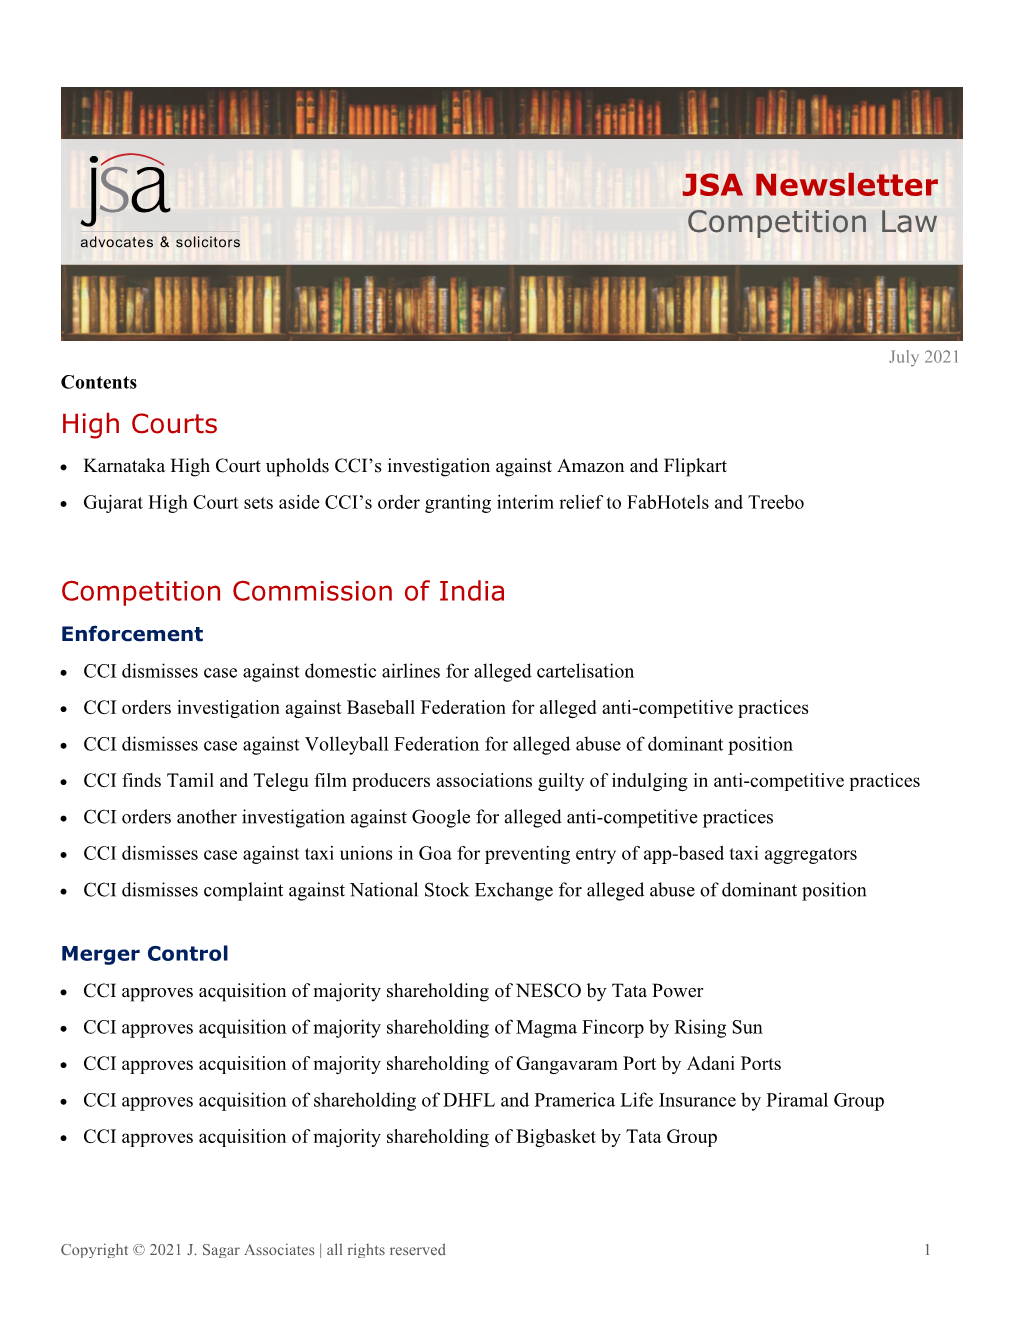 JSA Newsletter Competition Law